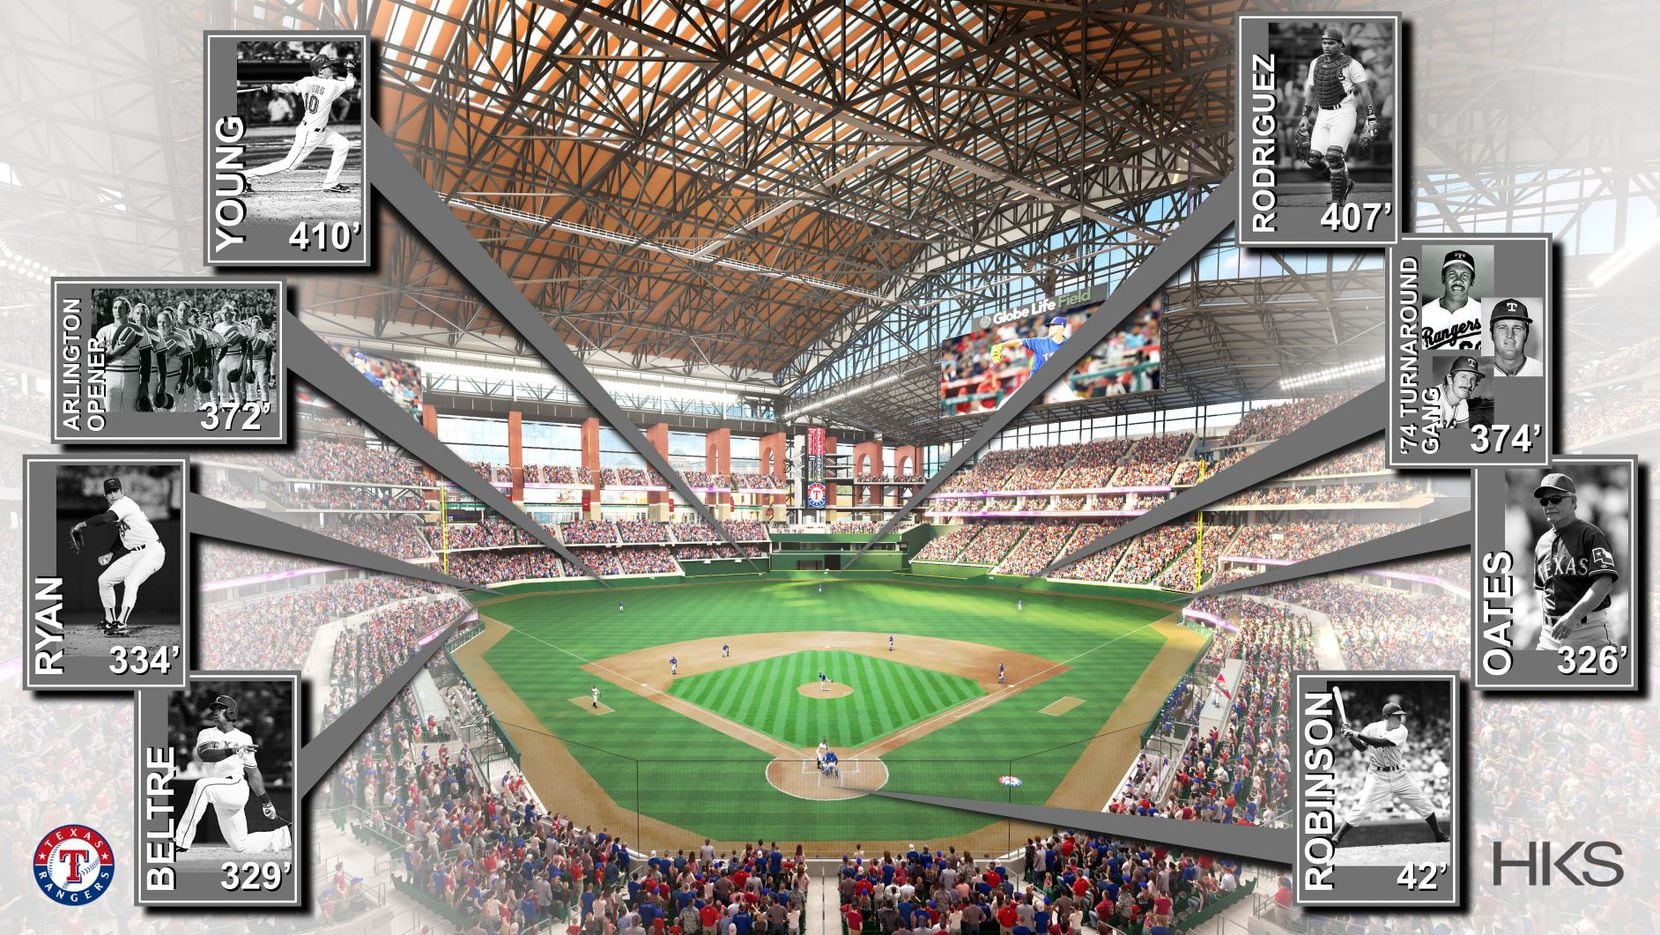 Renderings from the Texas Rangers of the field dimensions for Globe Life Field.